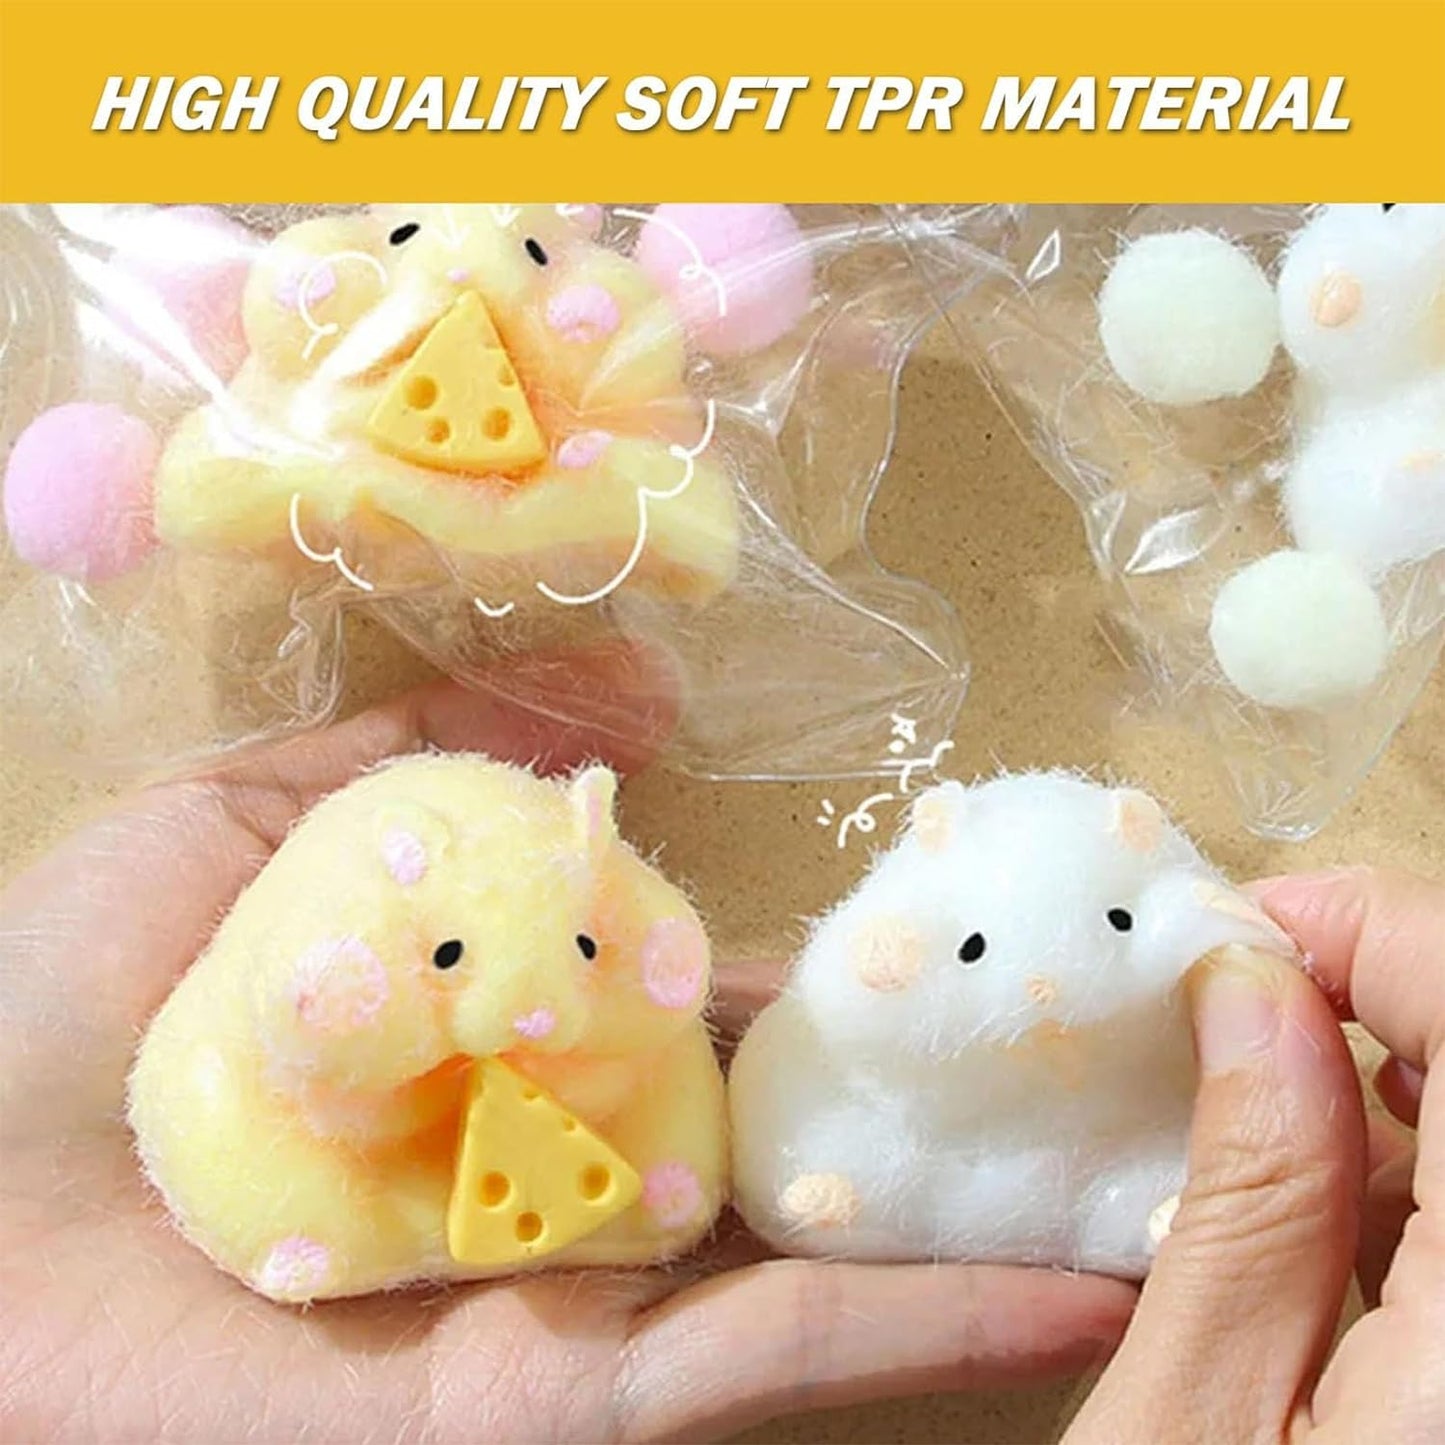 2 Pack Hamster Shaped Squeeze Toys,Sensory Fidget Toys for Stress Relief,Fun and Tricky Squishy Toy for Kids and Adults, for Easter, Christmas, and Birthdays